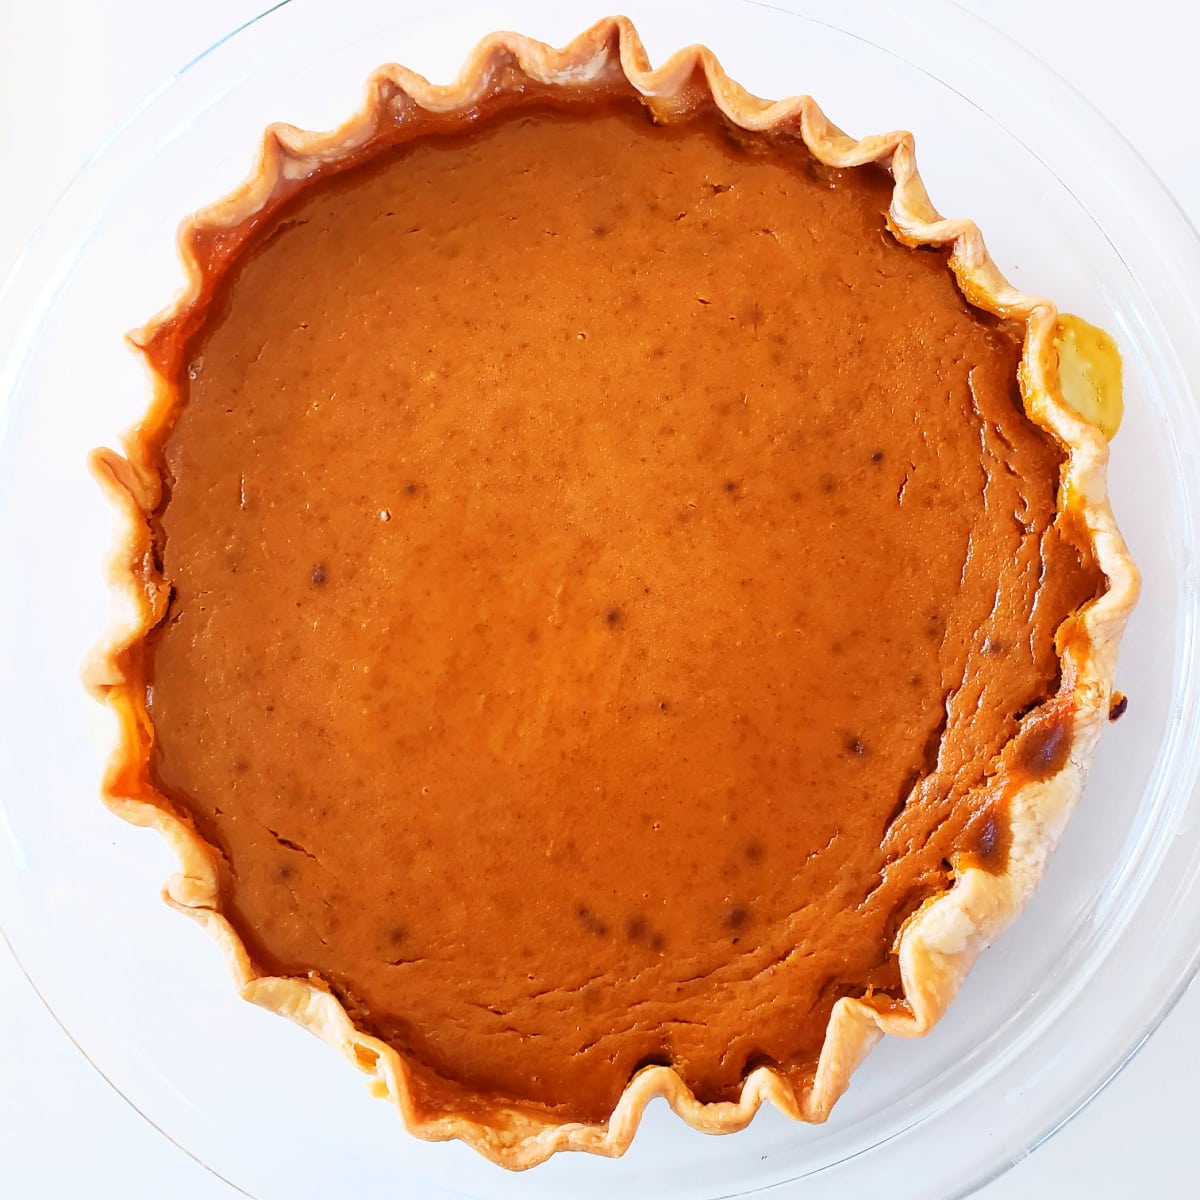 Brown colored Eggnog Pumpkin Pie baked and out of the oven on a white background